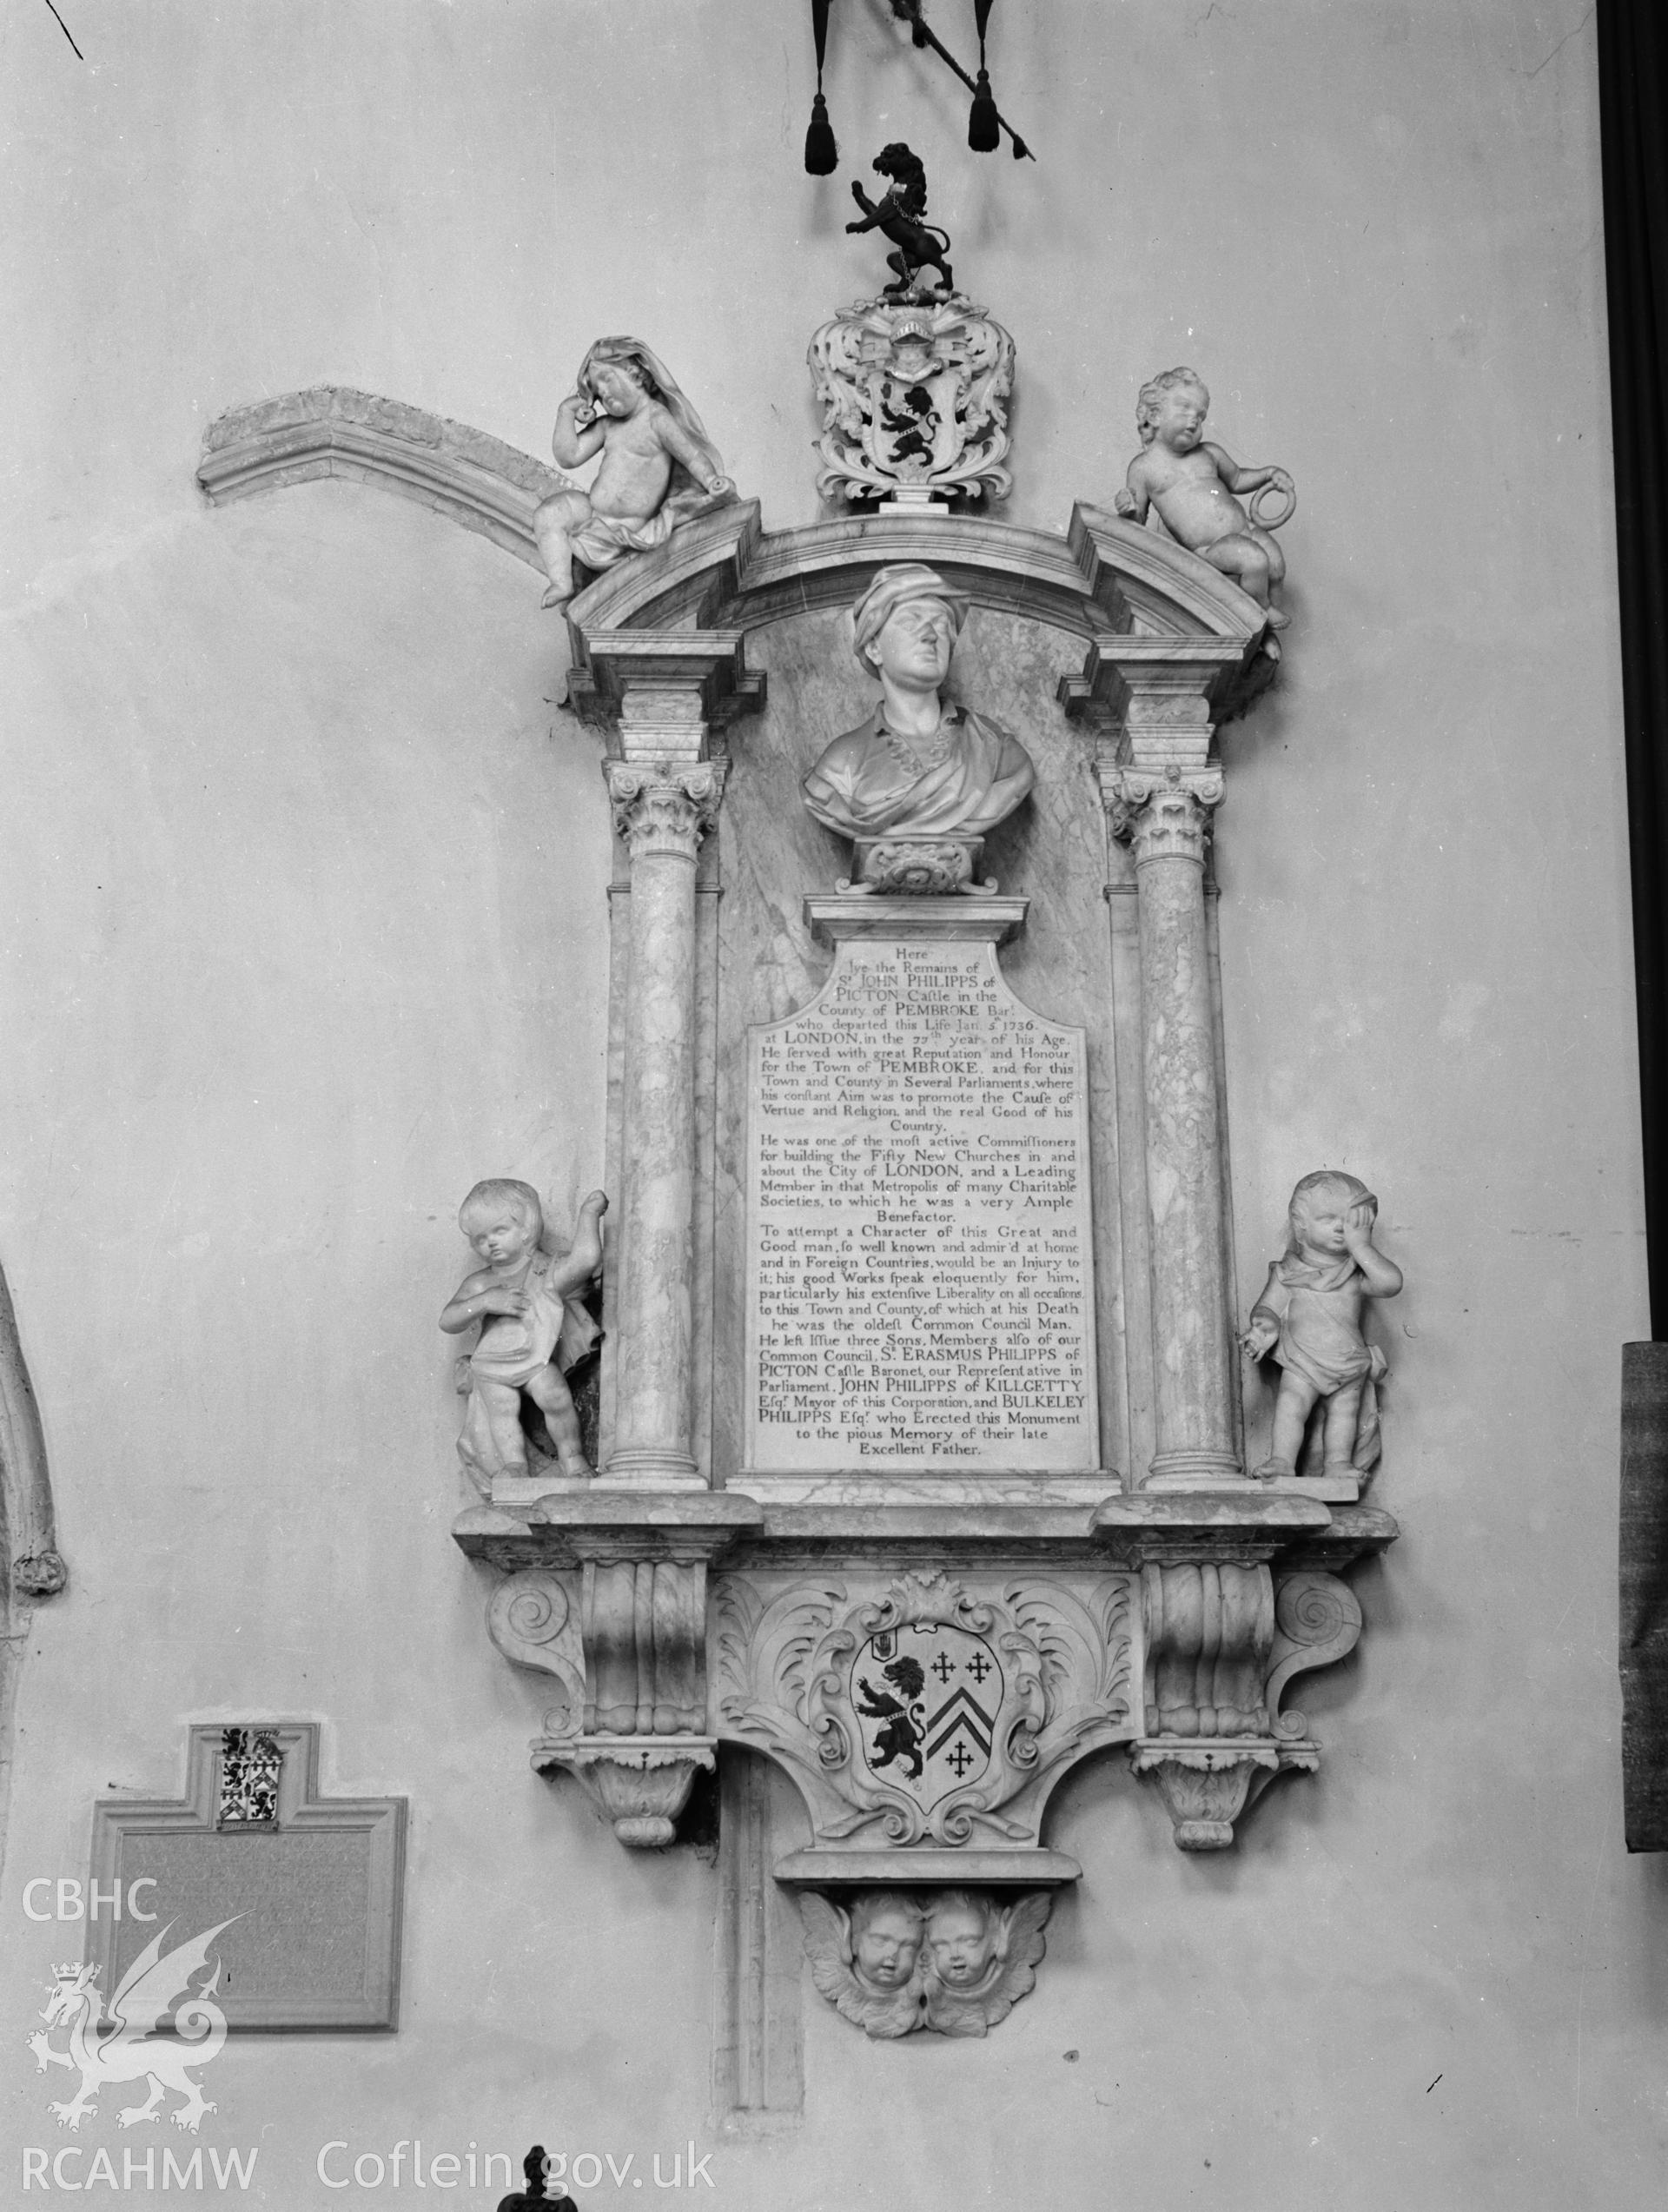 View of the memorial on the north wall of the chancel at St Marys Church